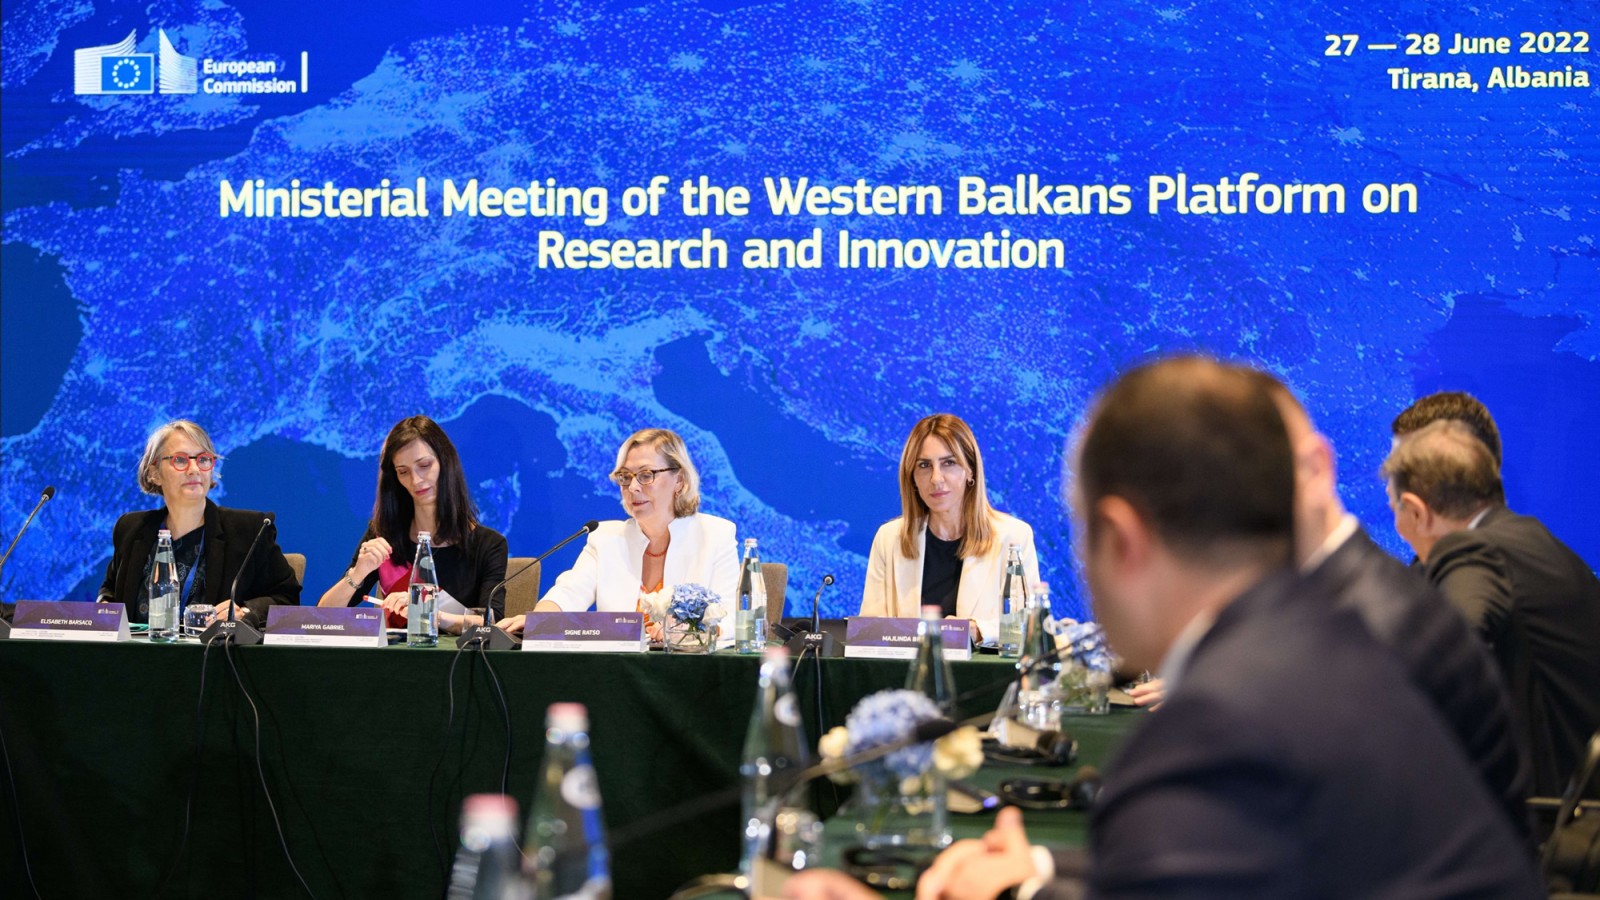 RCC SG  at the Ministerial Meeting of the Western Balkans Platform on Research and Innovation